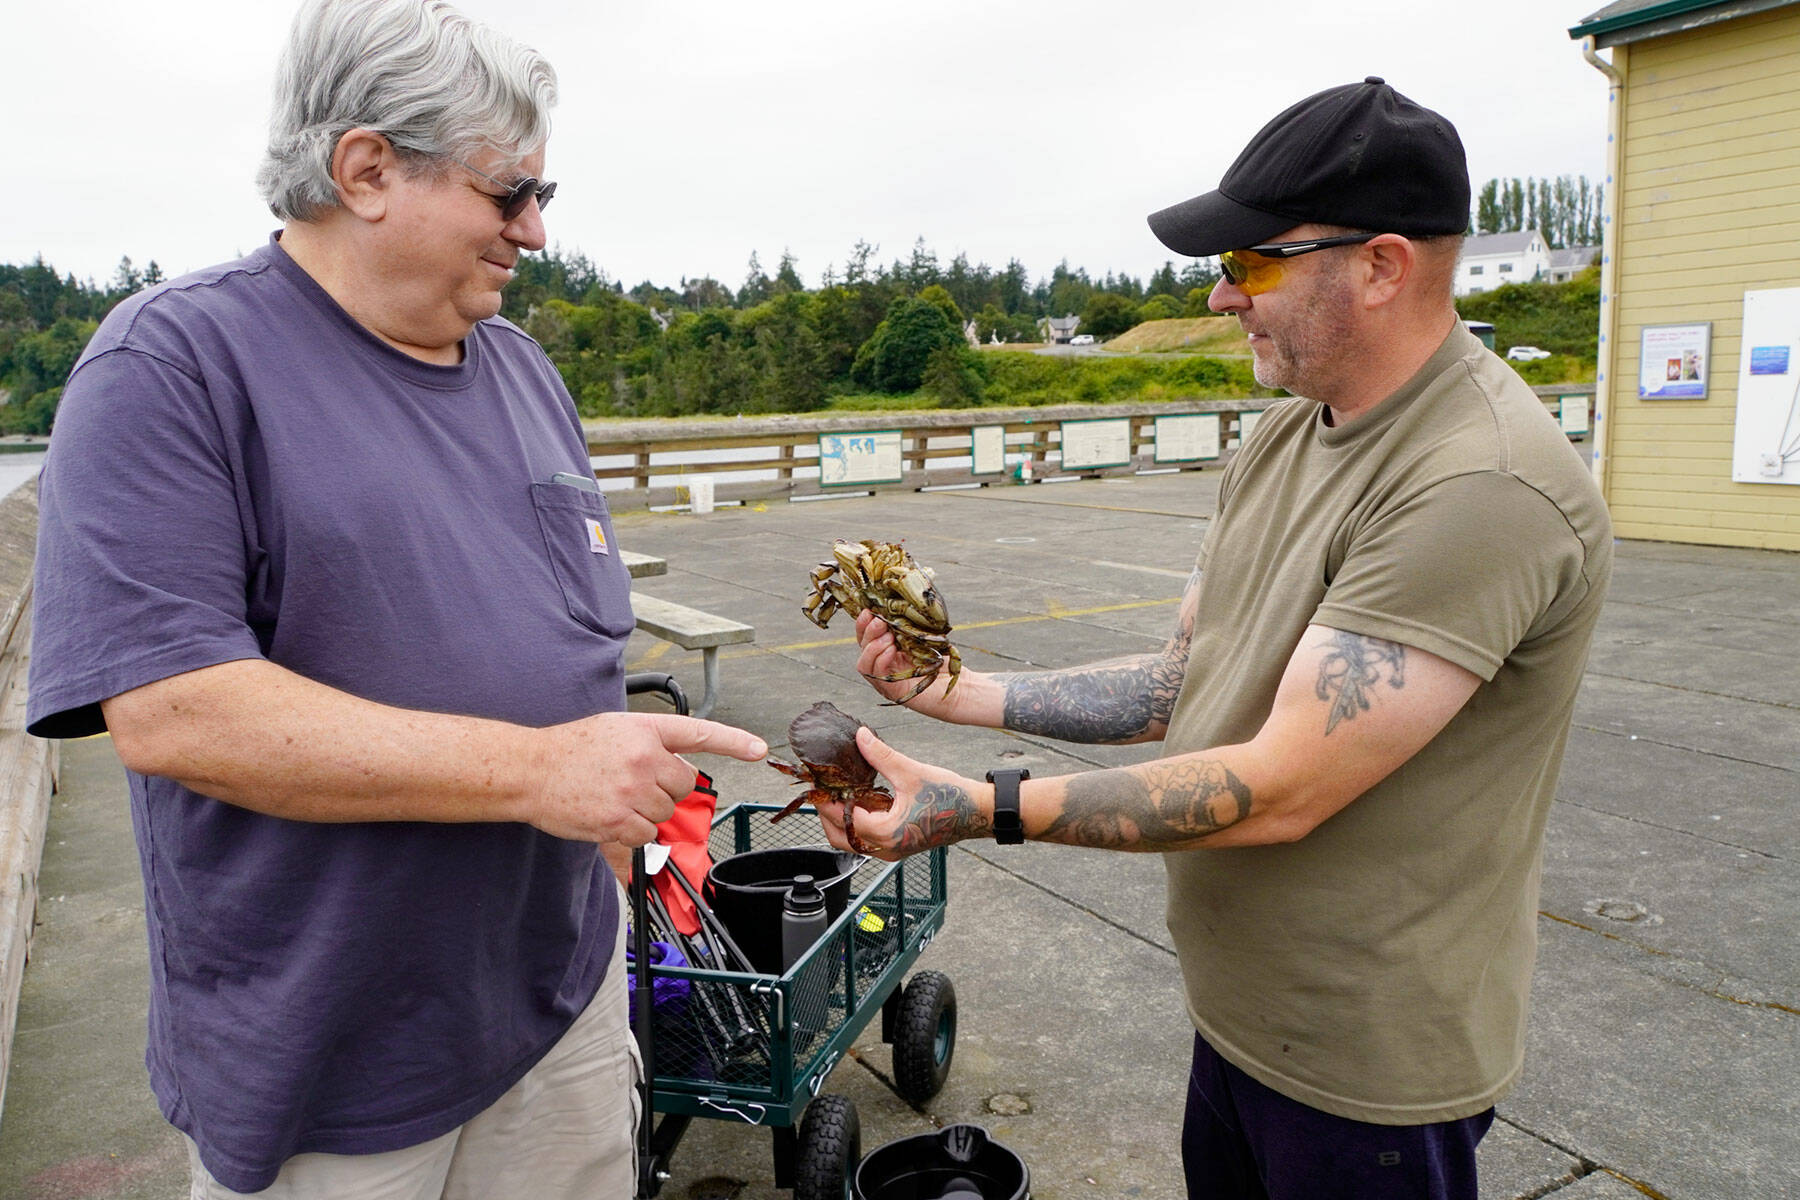 Scott Miller, left, of Silverdale points to the undersized rock crab that Tom Price of Spanaway is holding. Both men were crabbing off the Marine Science Center pier at Fort Worden on Thursday. The other crab was barely legal size, and Price put both back into the sea. (Steve Mullensky/for Peninsula Daily News)